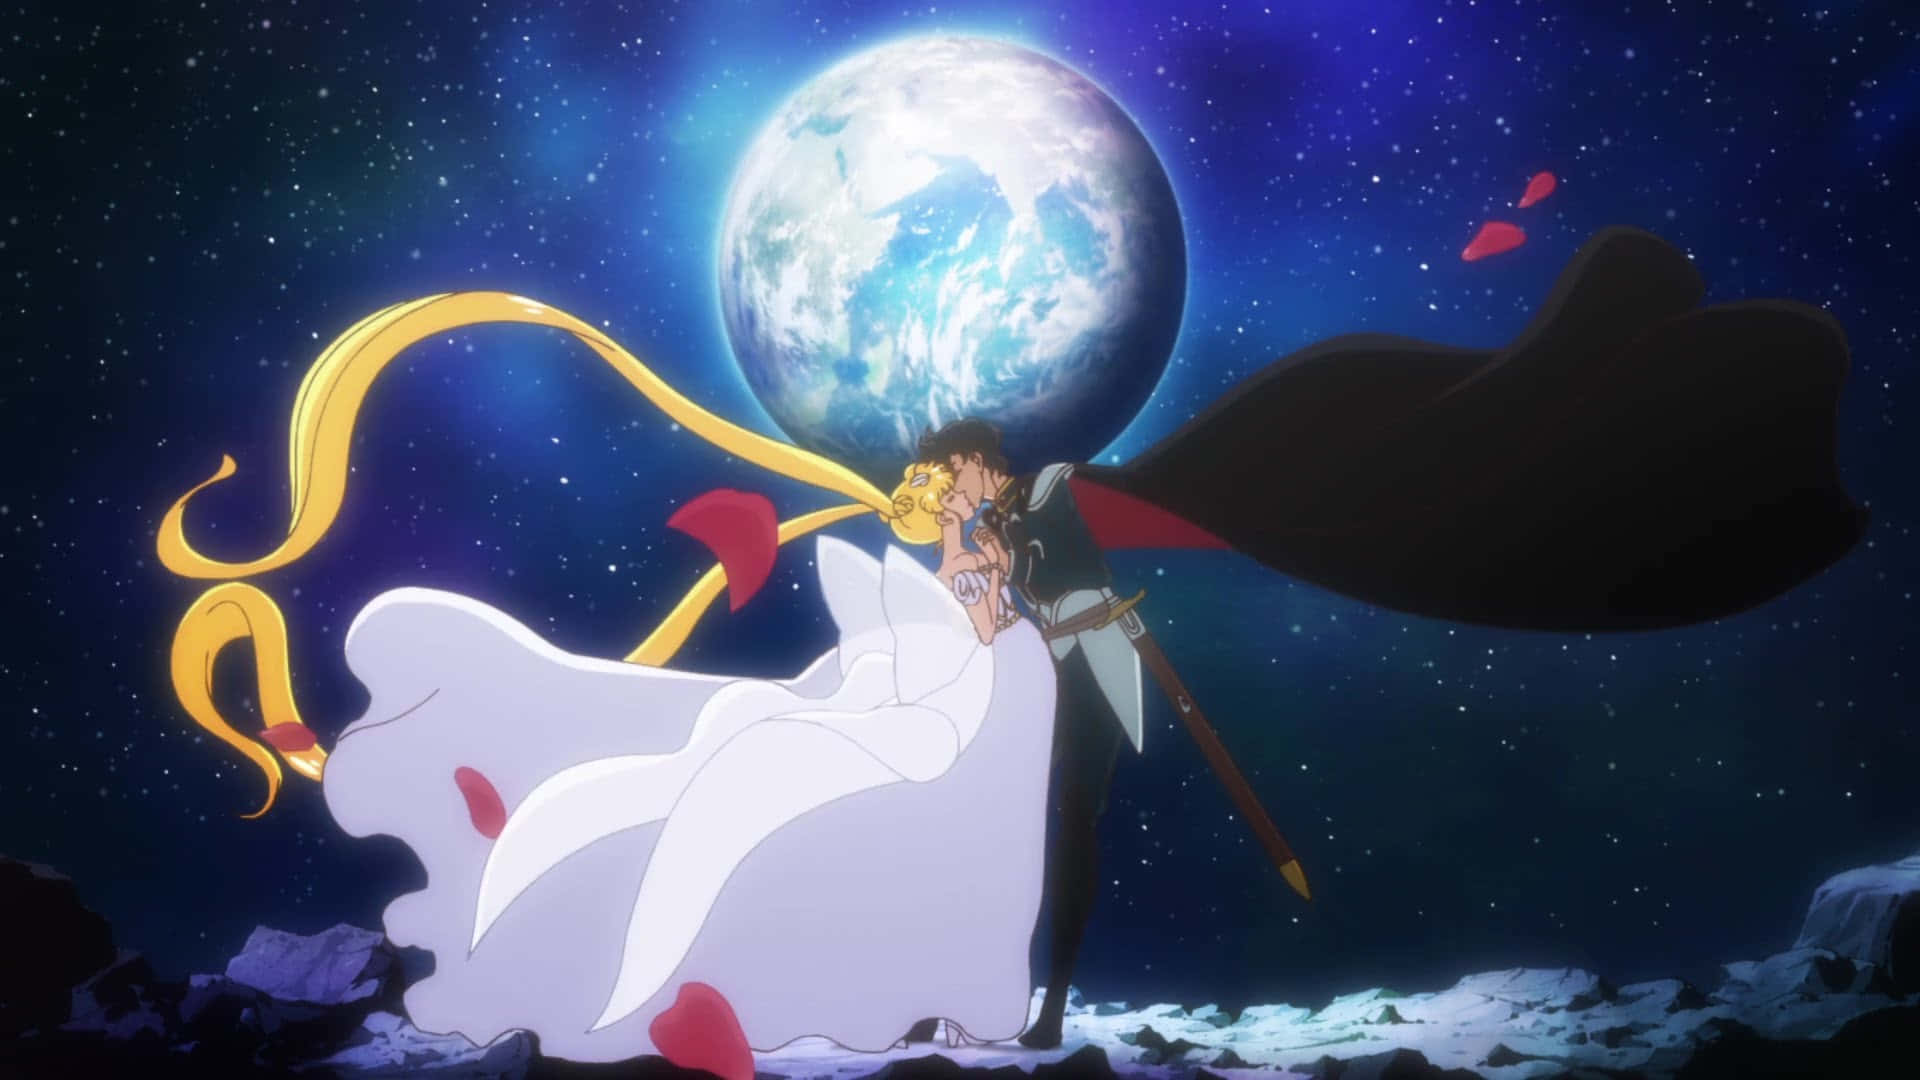 A magical transformation: Sailor Moon arrives to save the day